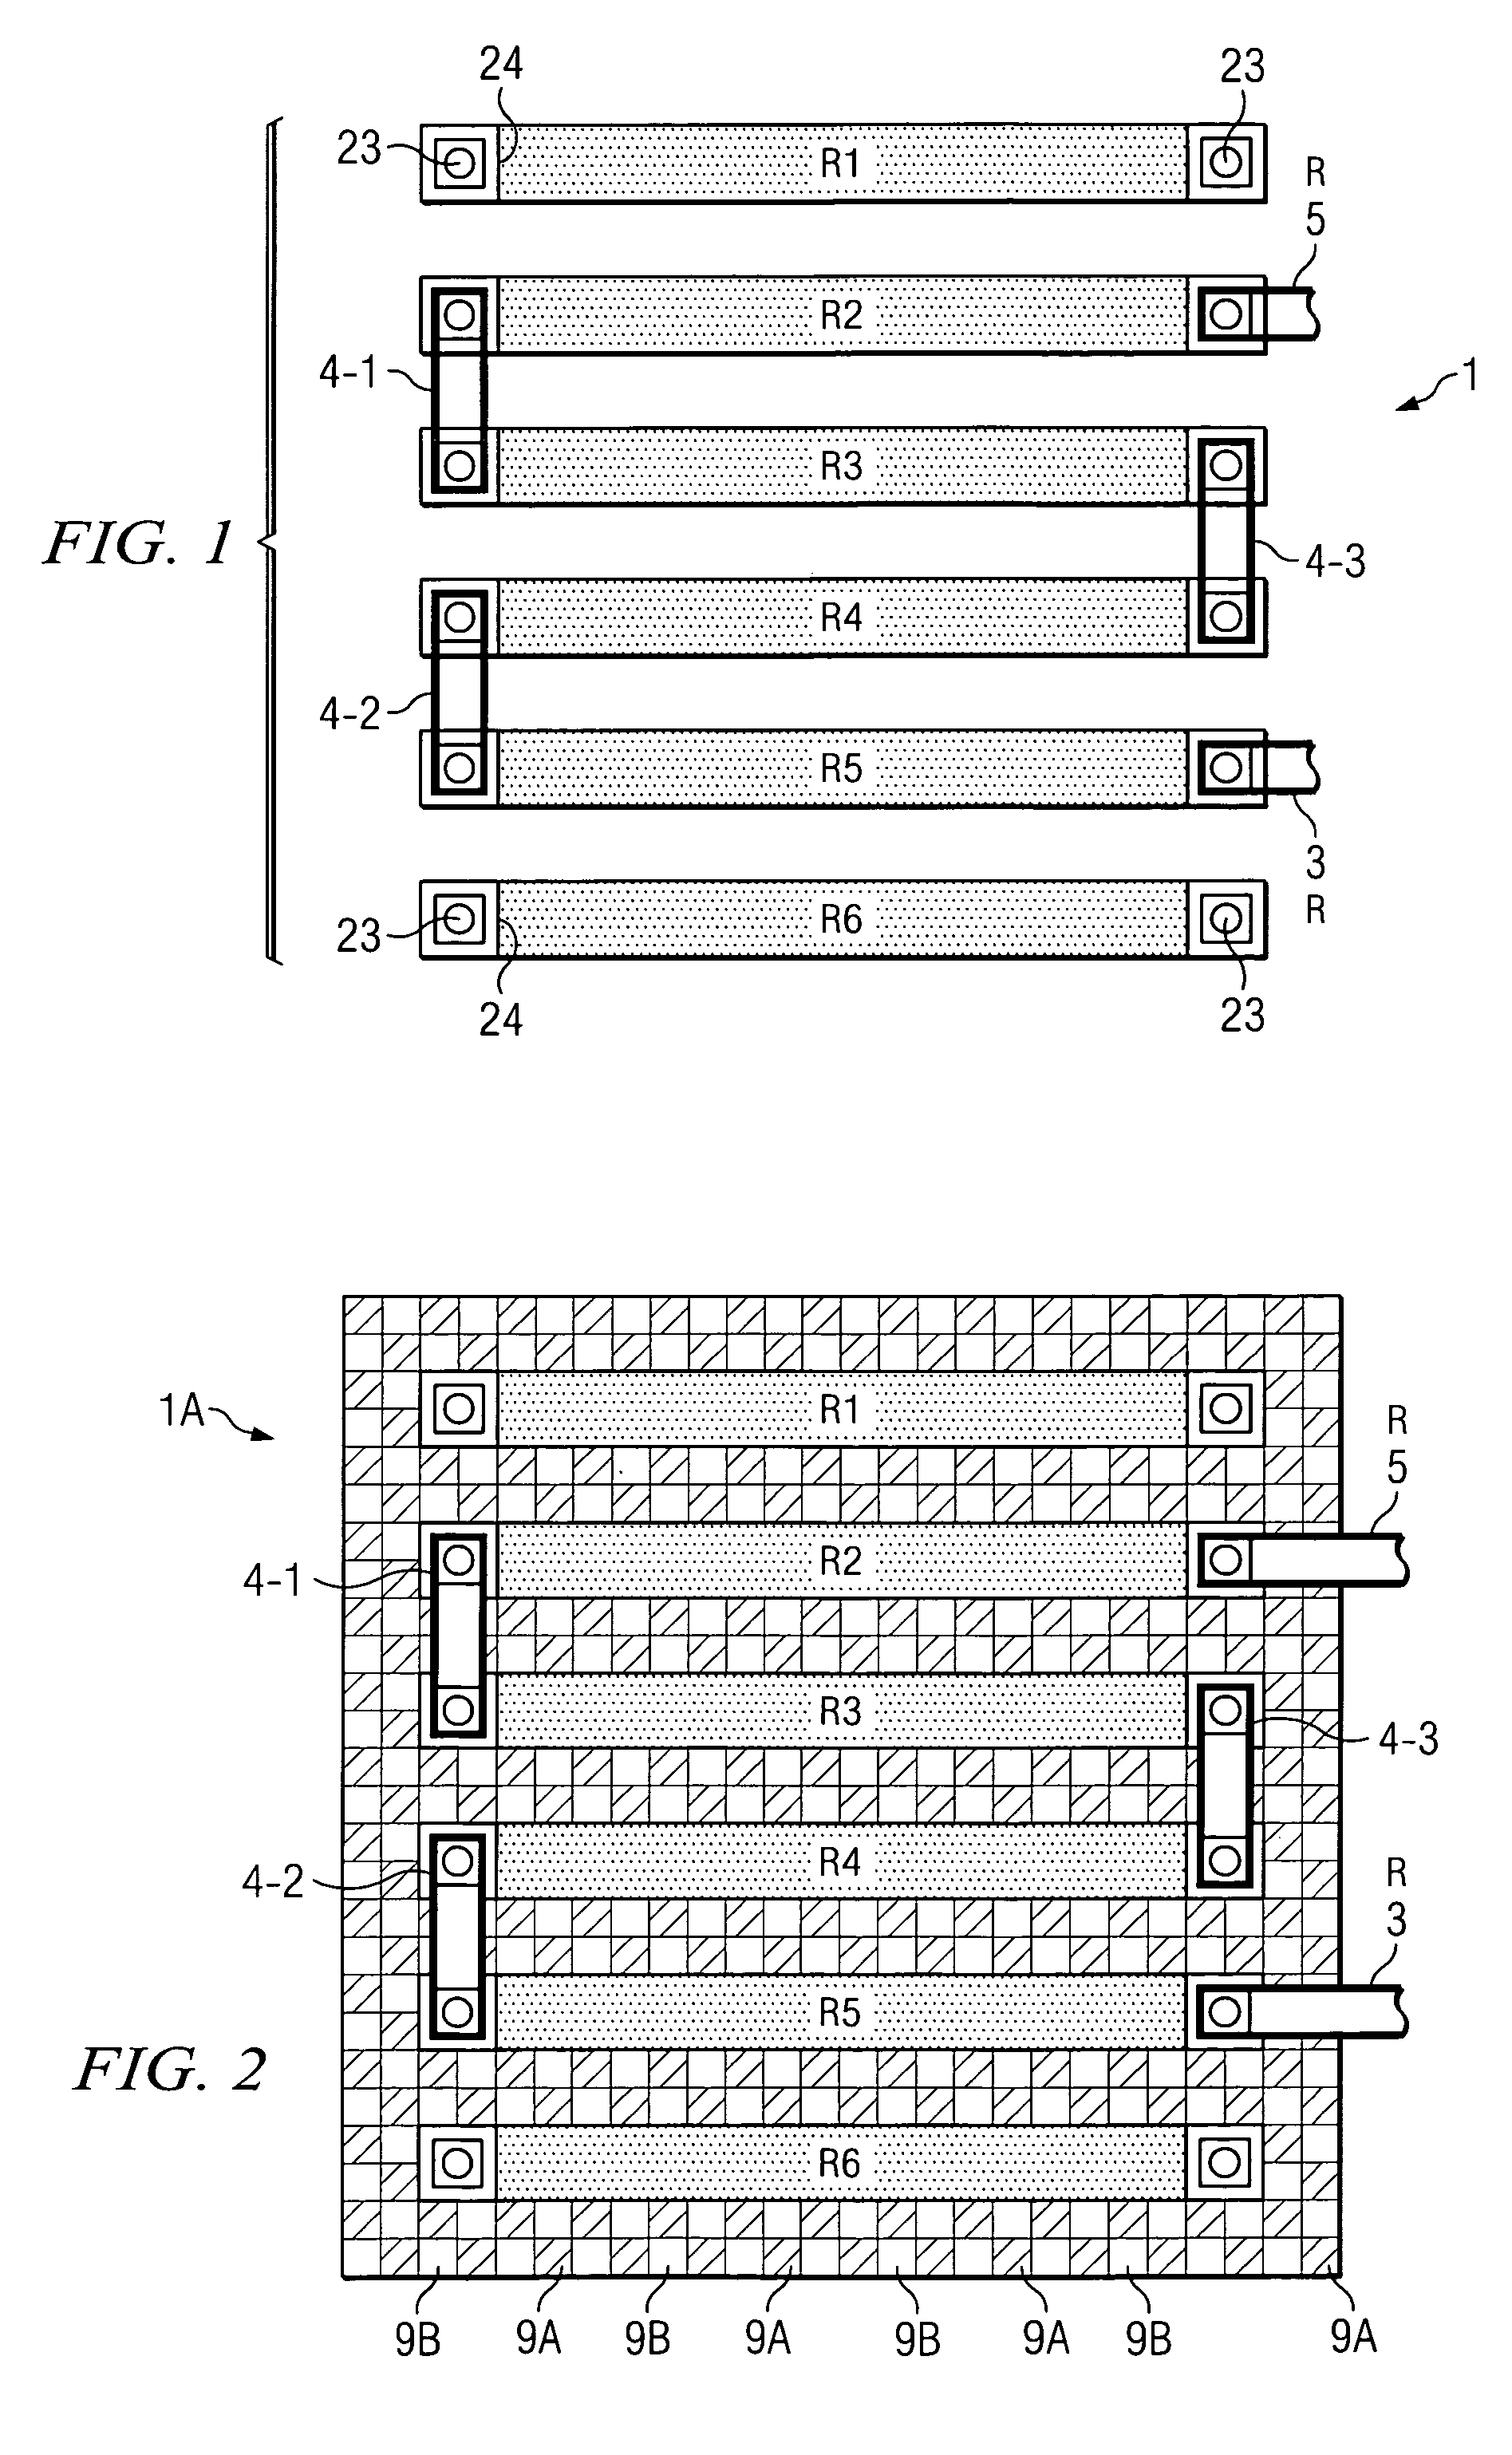 Thin film resistor and dummy fill structure and method to improve stability and reduce self-heating